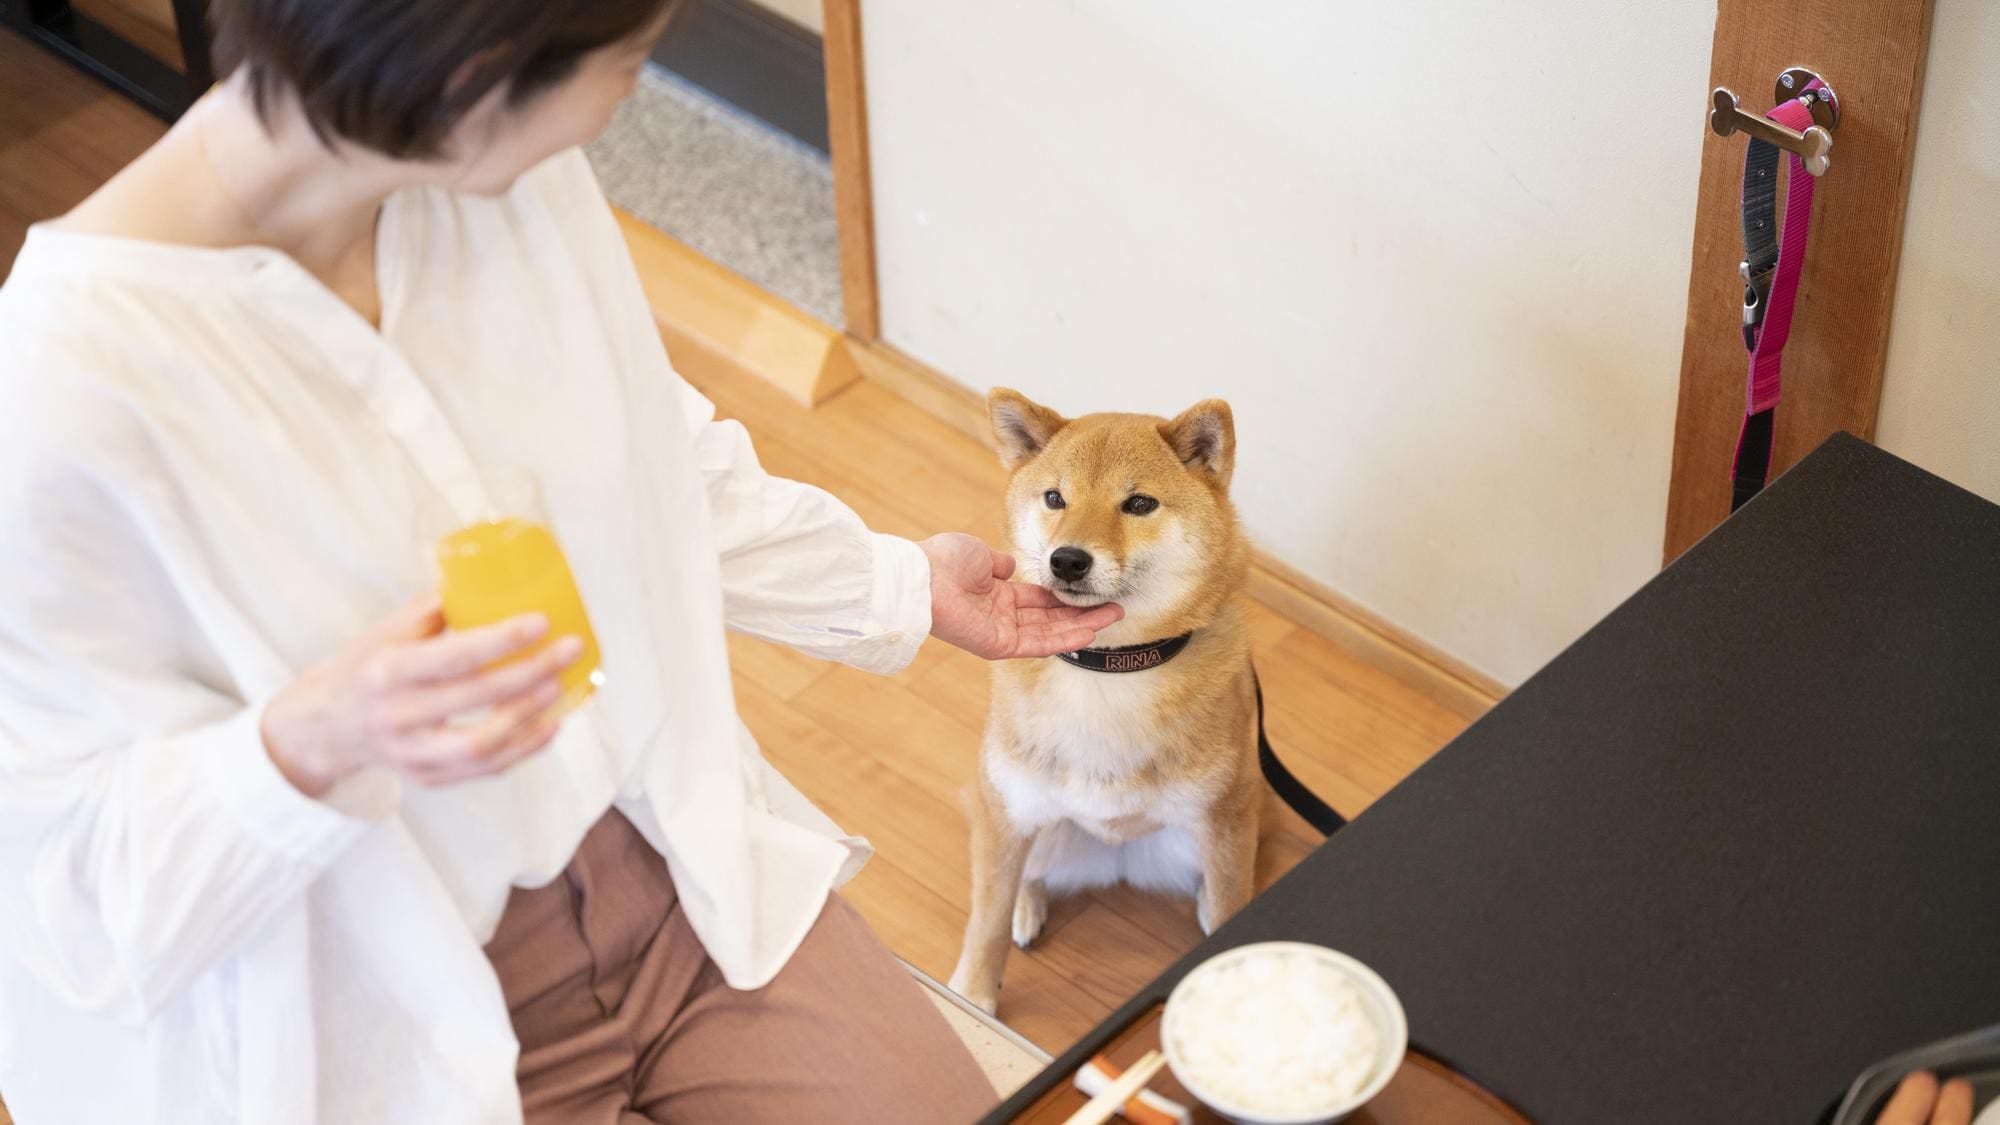 You can eat with your dog.